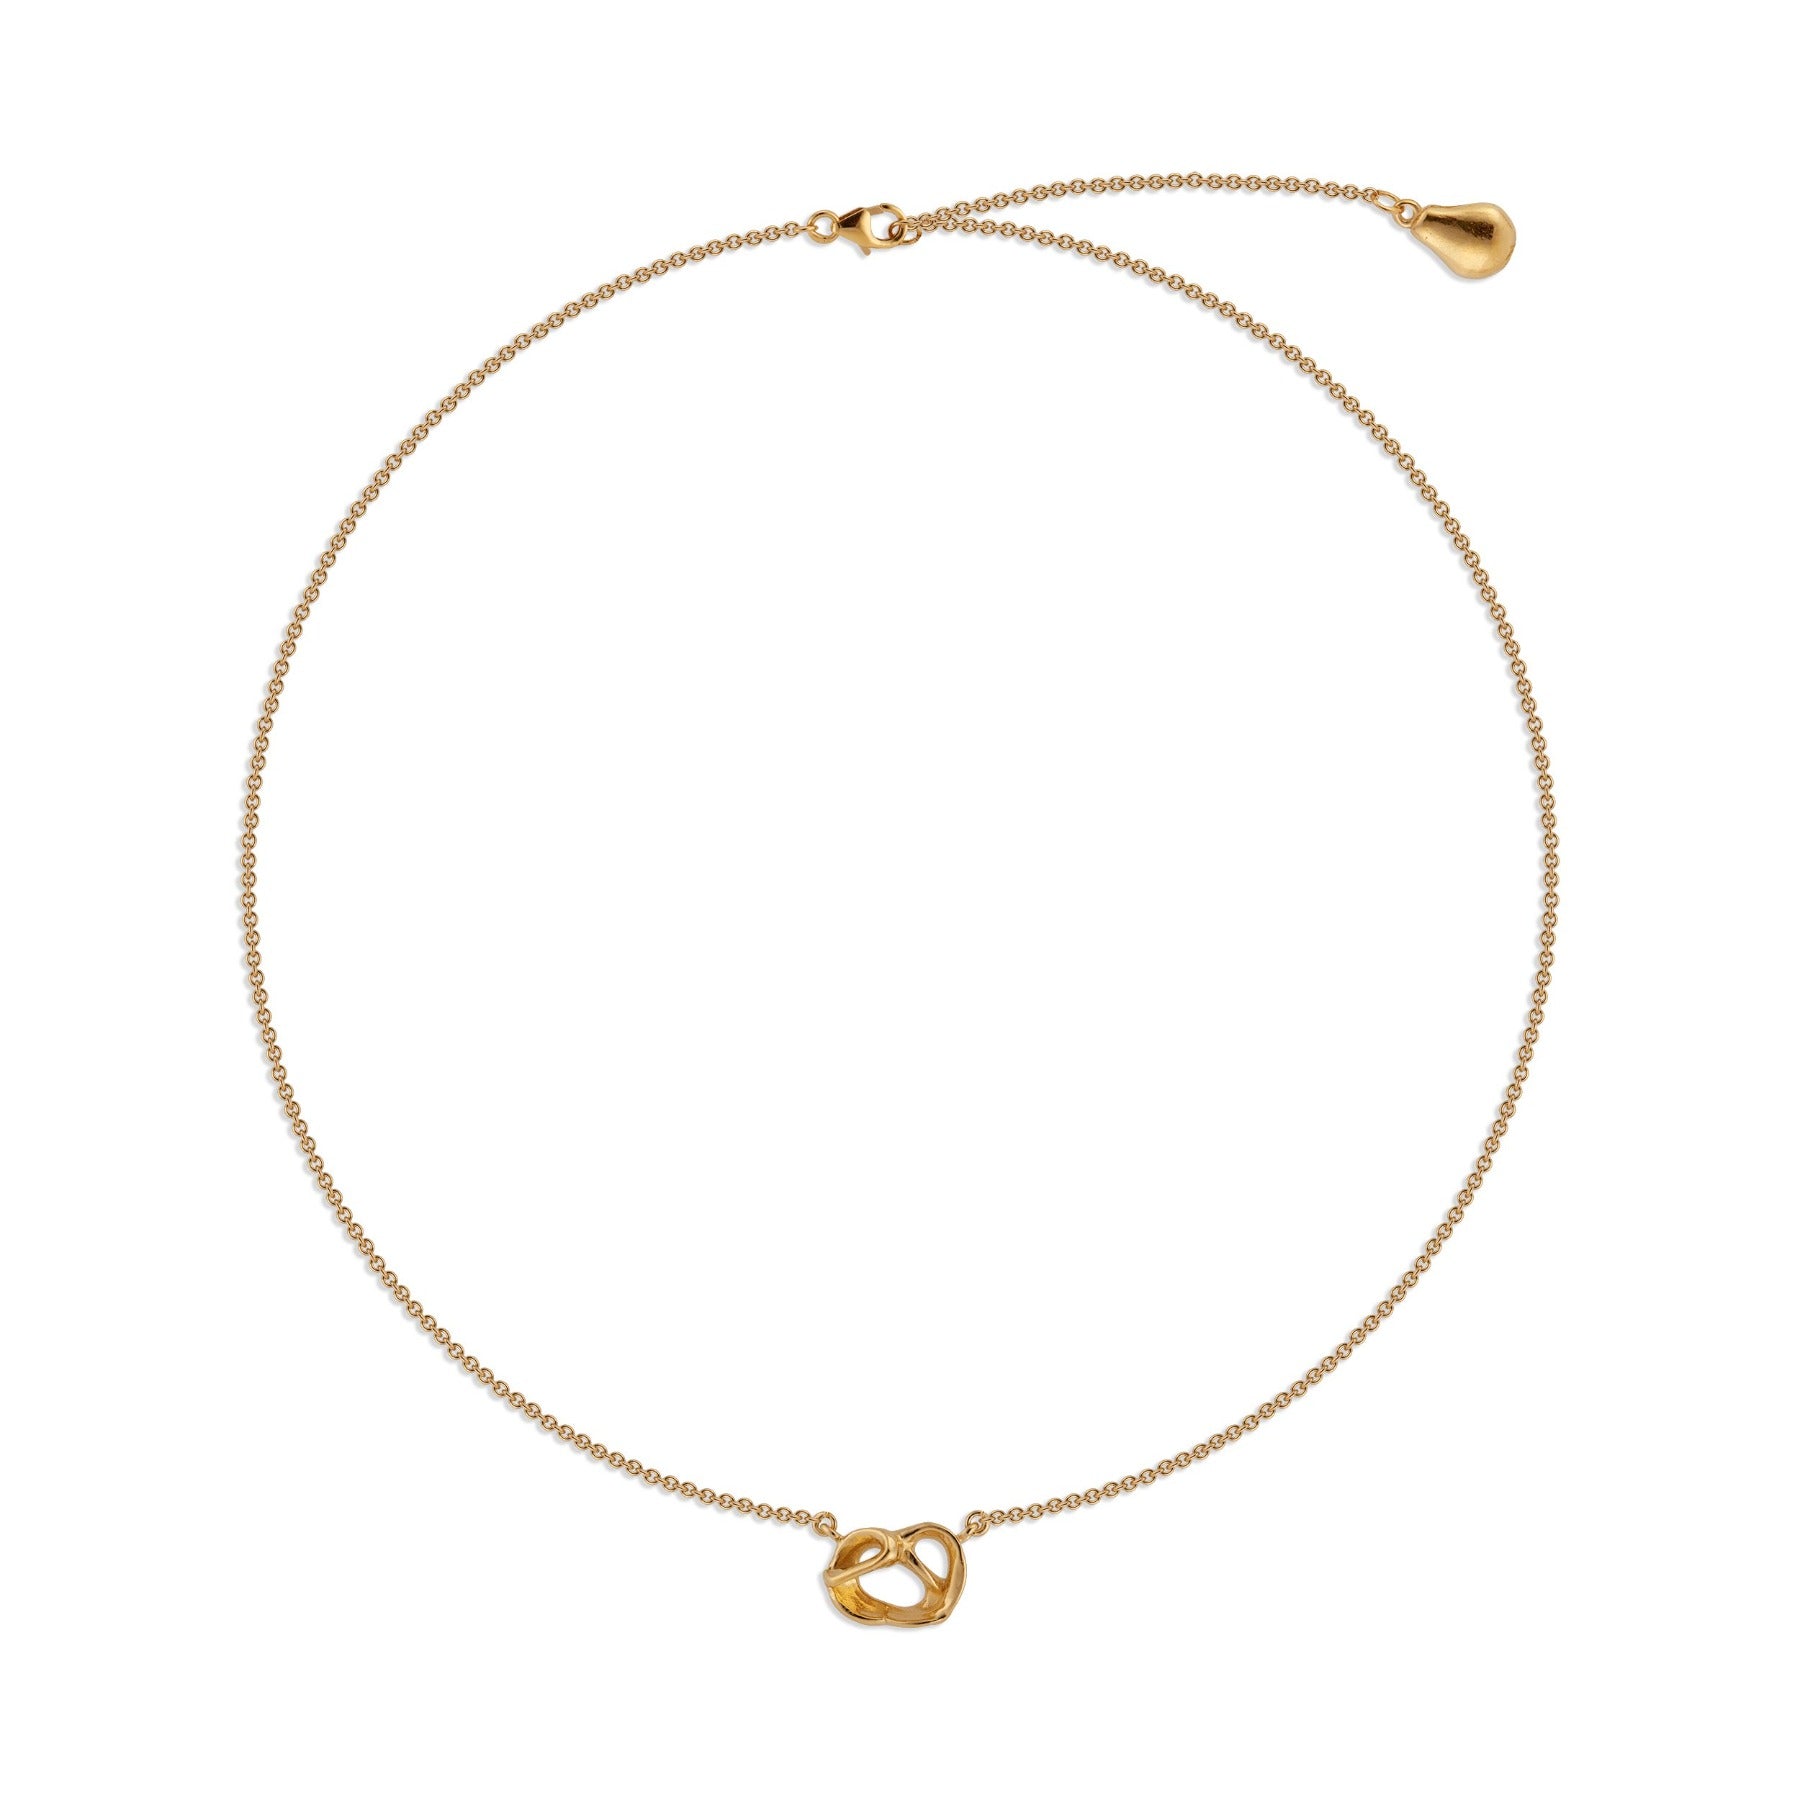 Organically shaped pretzel pendant on delicate chain with pear charm in 18k gold vermeil.